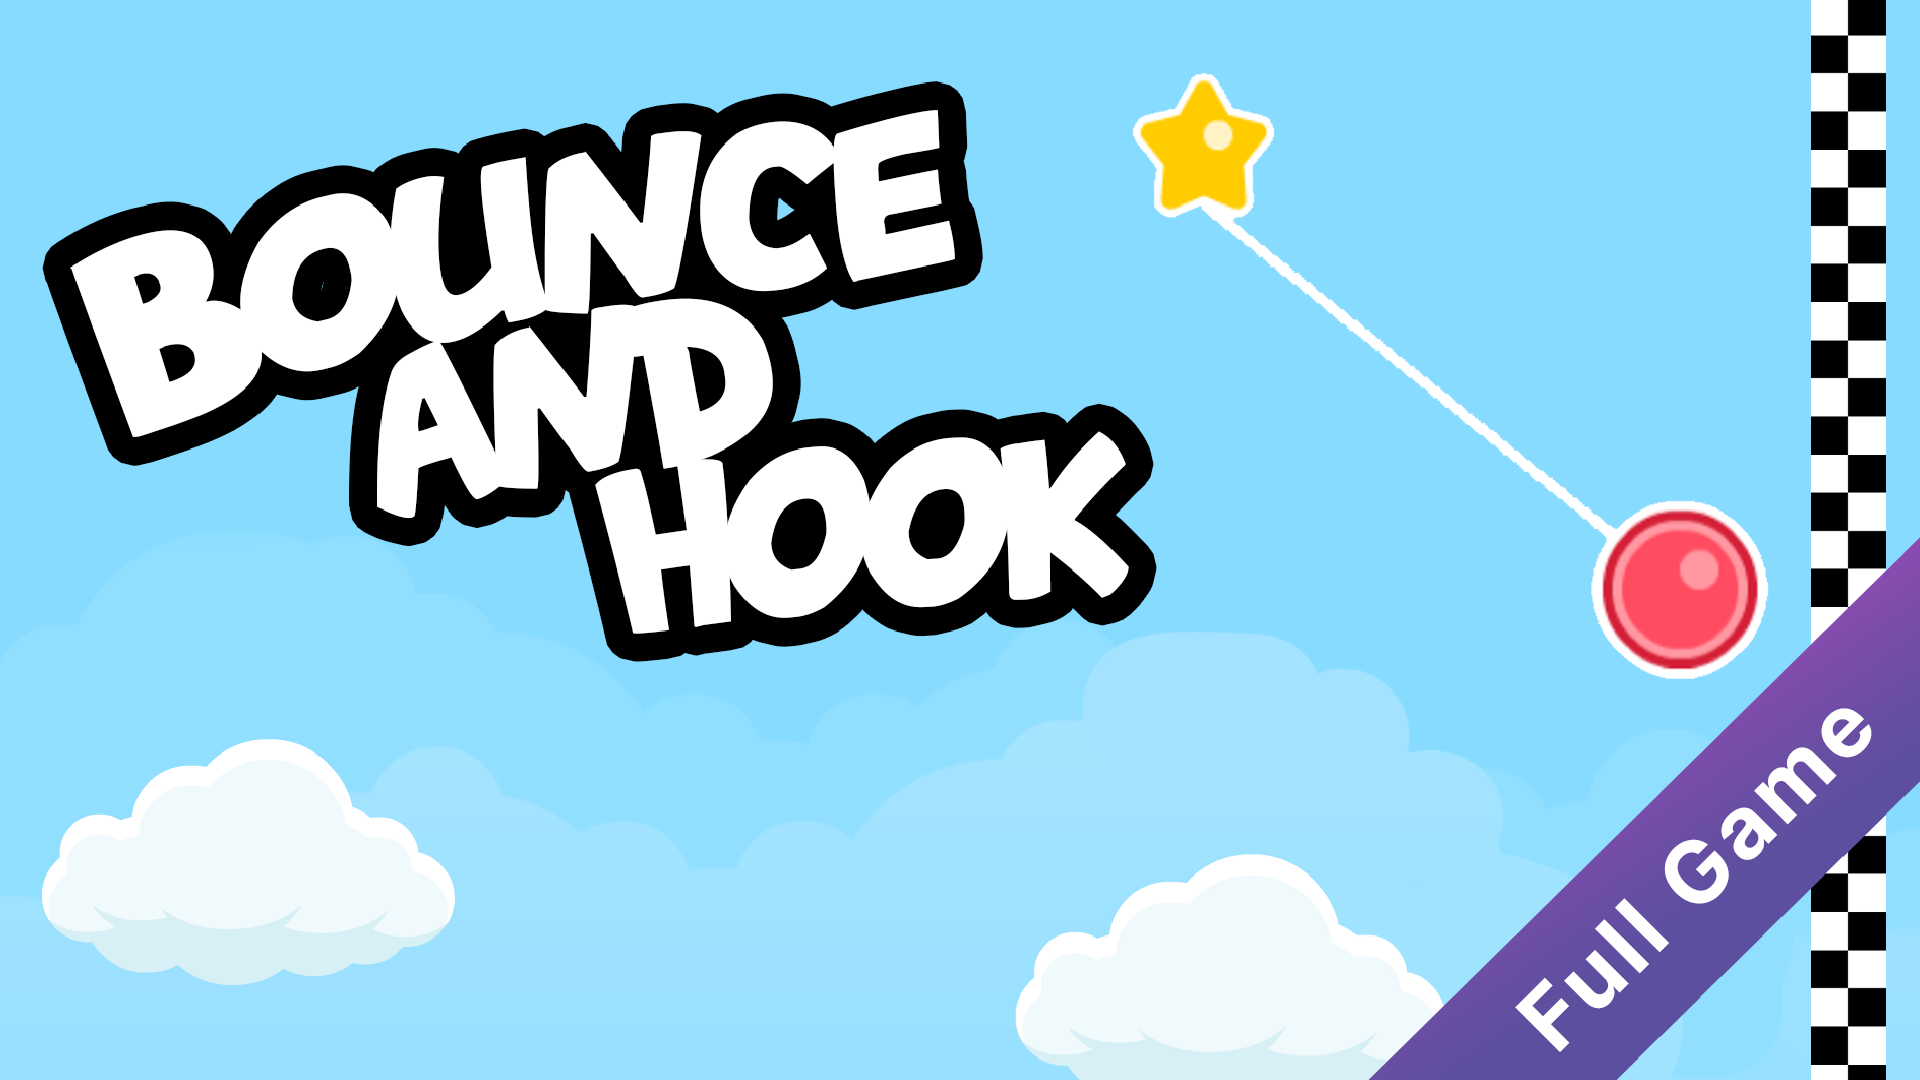 Bounce and hook